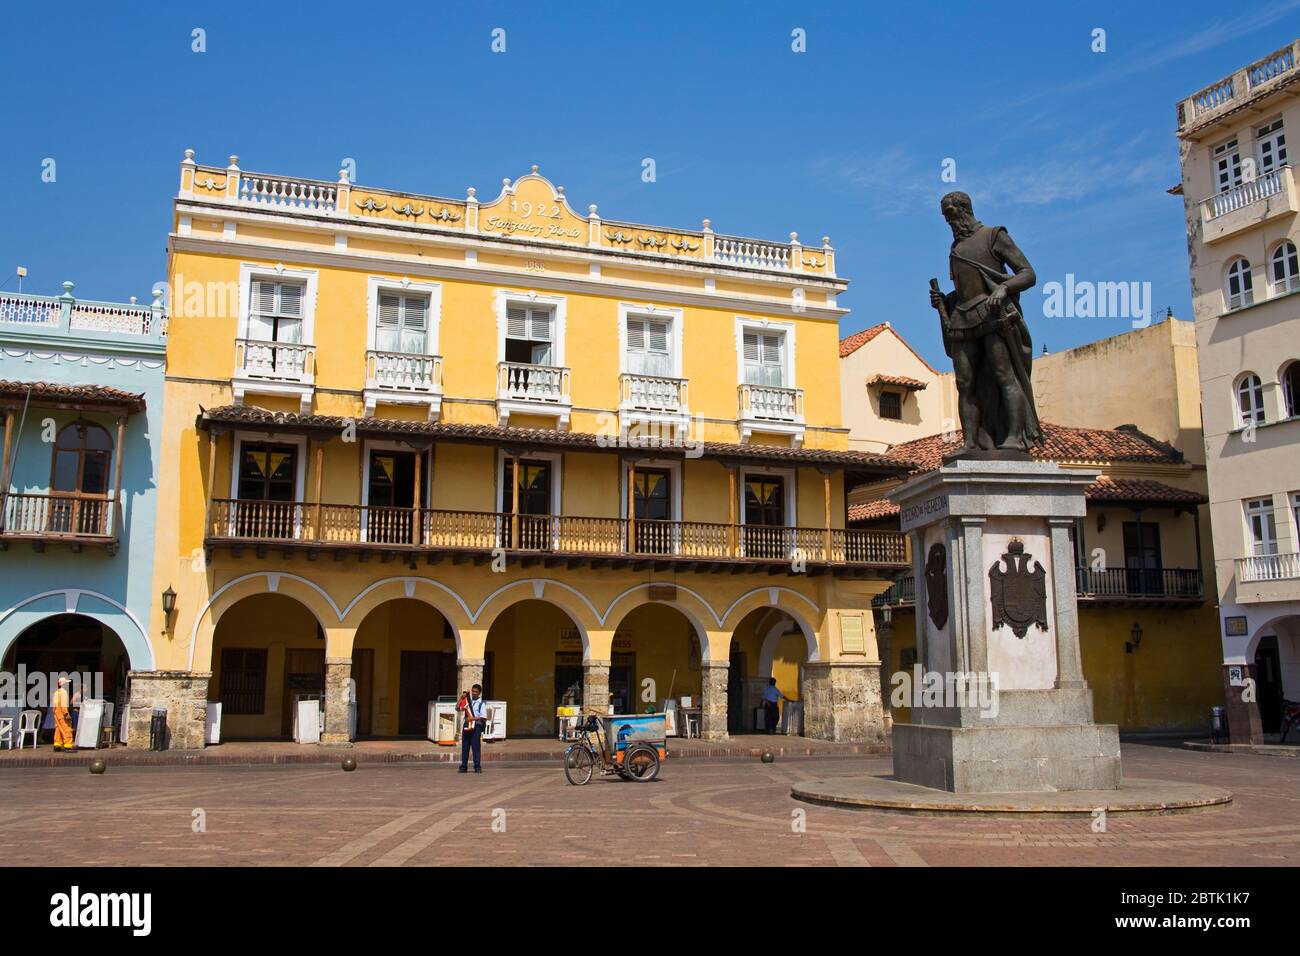 Statue of Pedro de Heredia in Plaza de Los Coches, Old Walled City District, Cartagena City, Bolivar State, Colombia, Central America Stock Photo